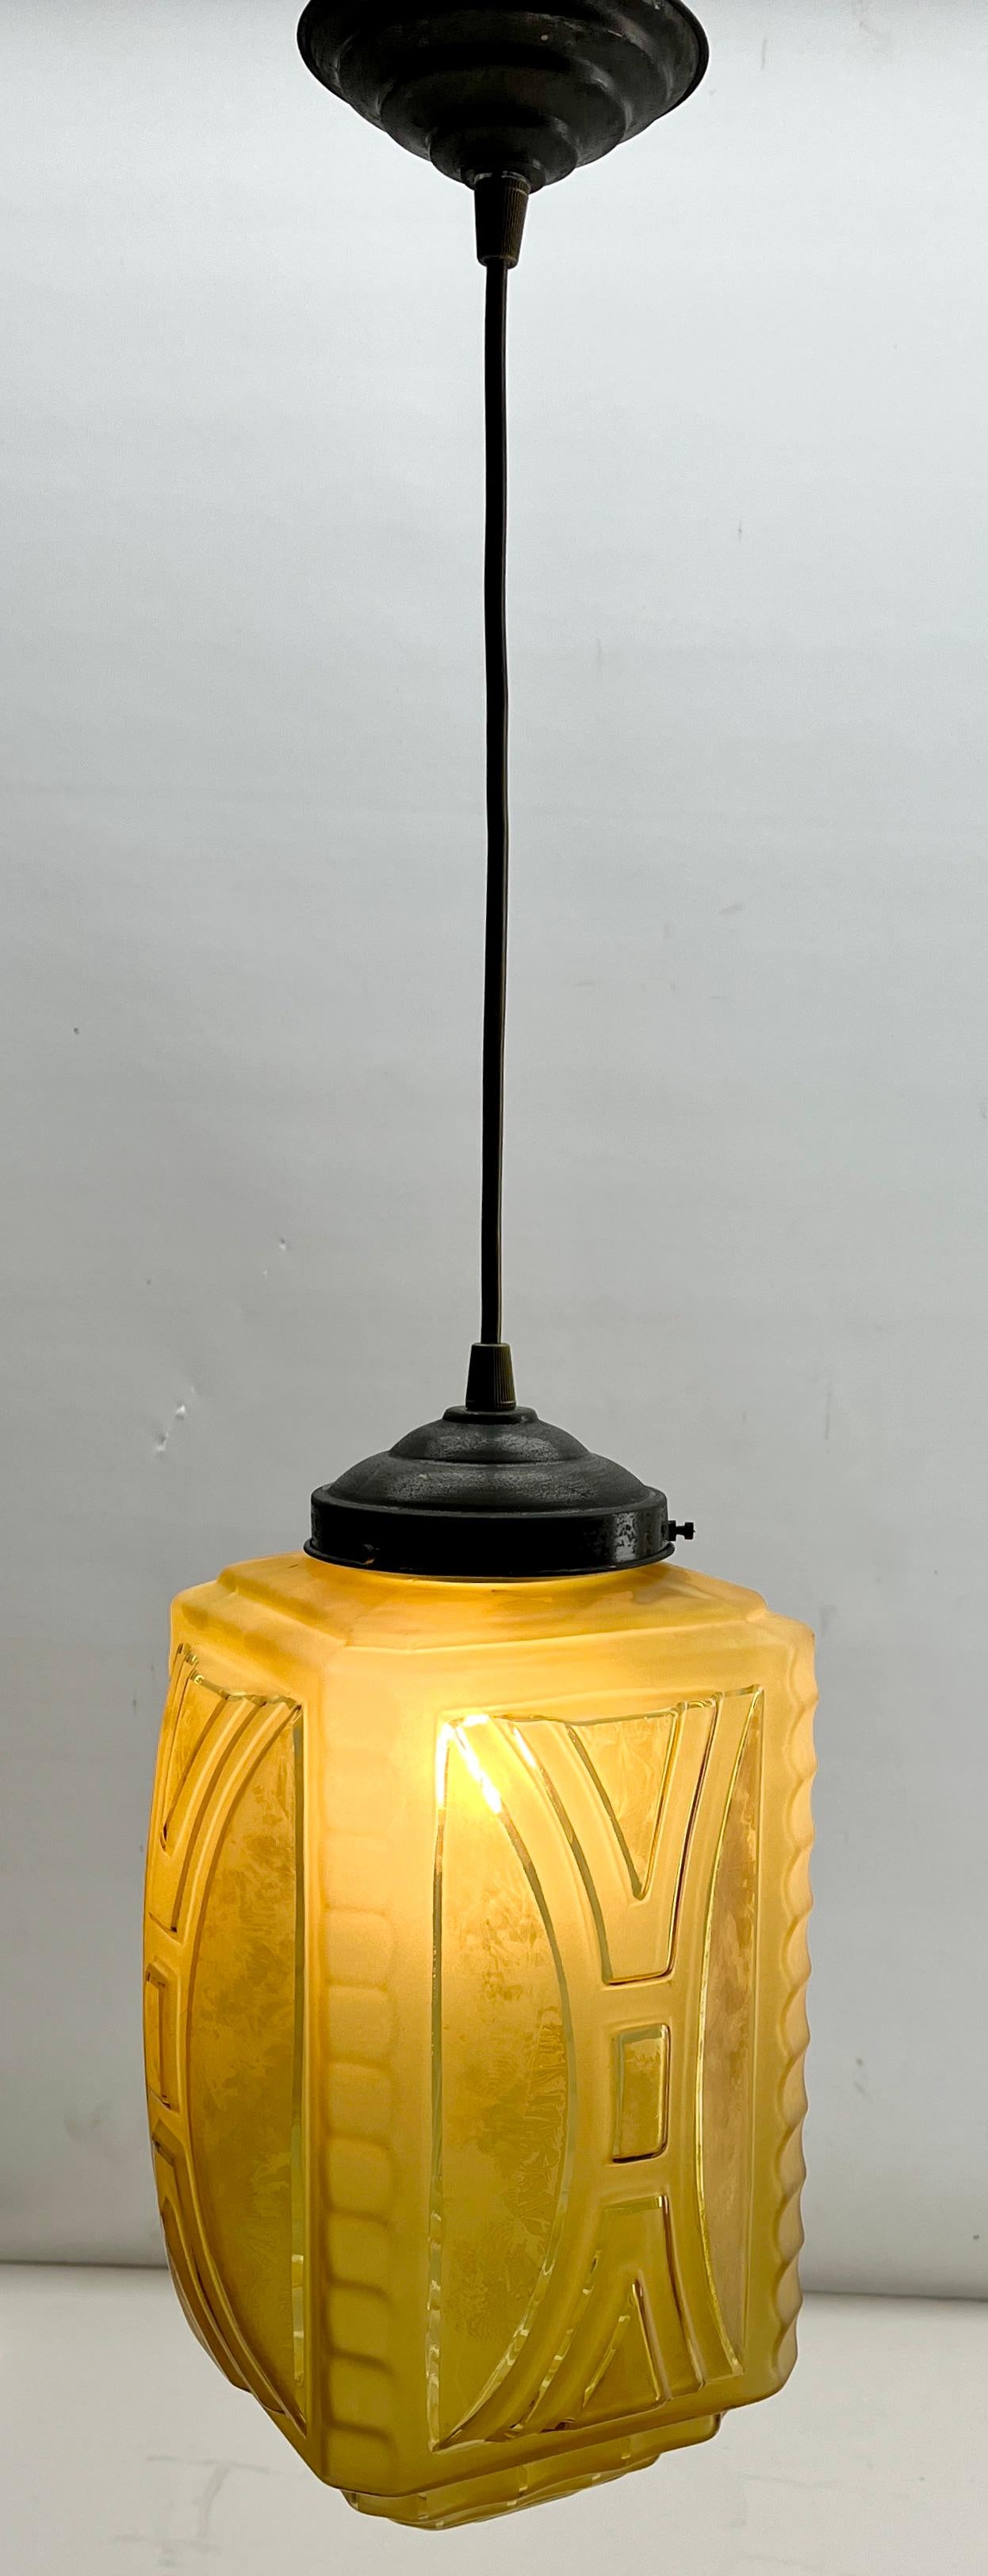 Mid-20th Century Art Deco Ceiling Lamp, Belgium Glass Shade Scailmont, 1930s For Sale